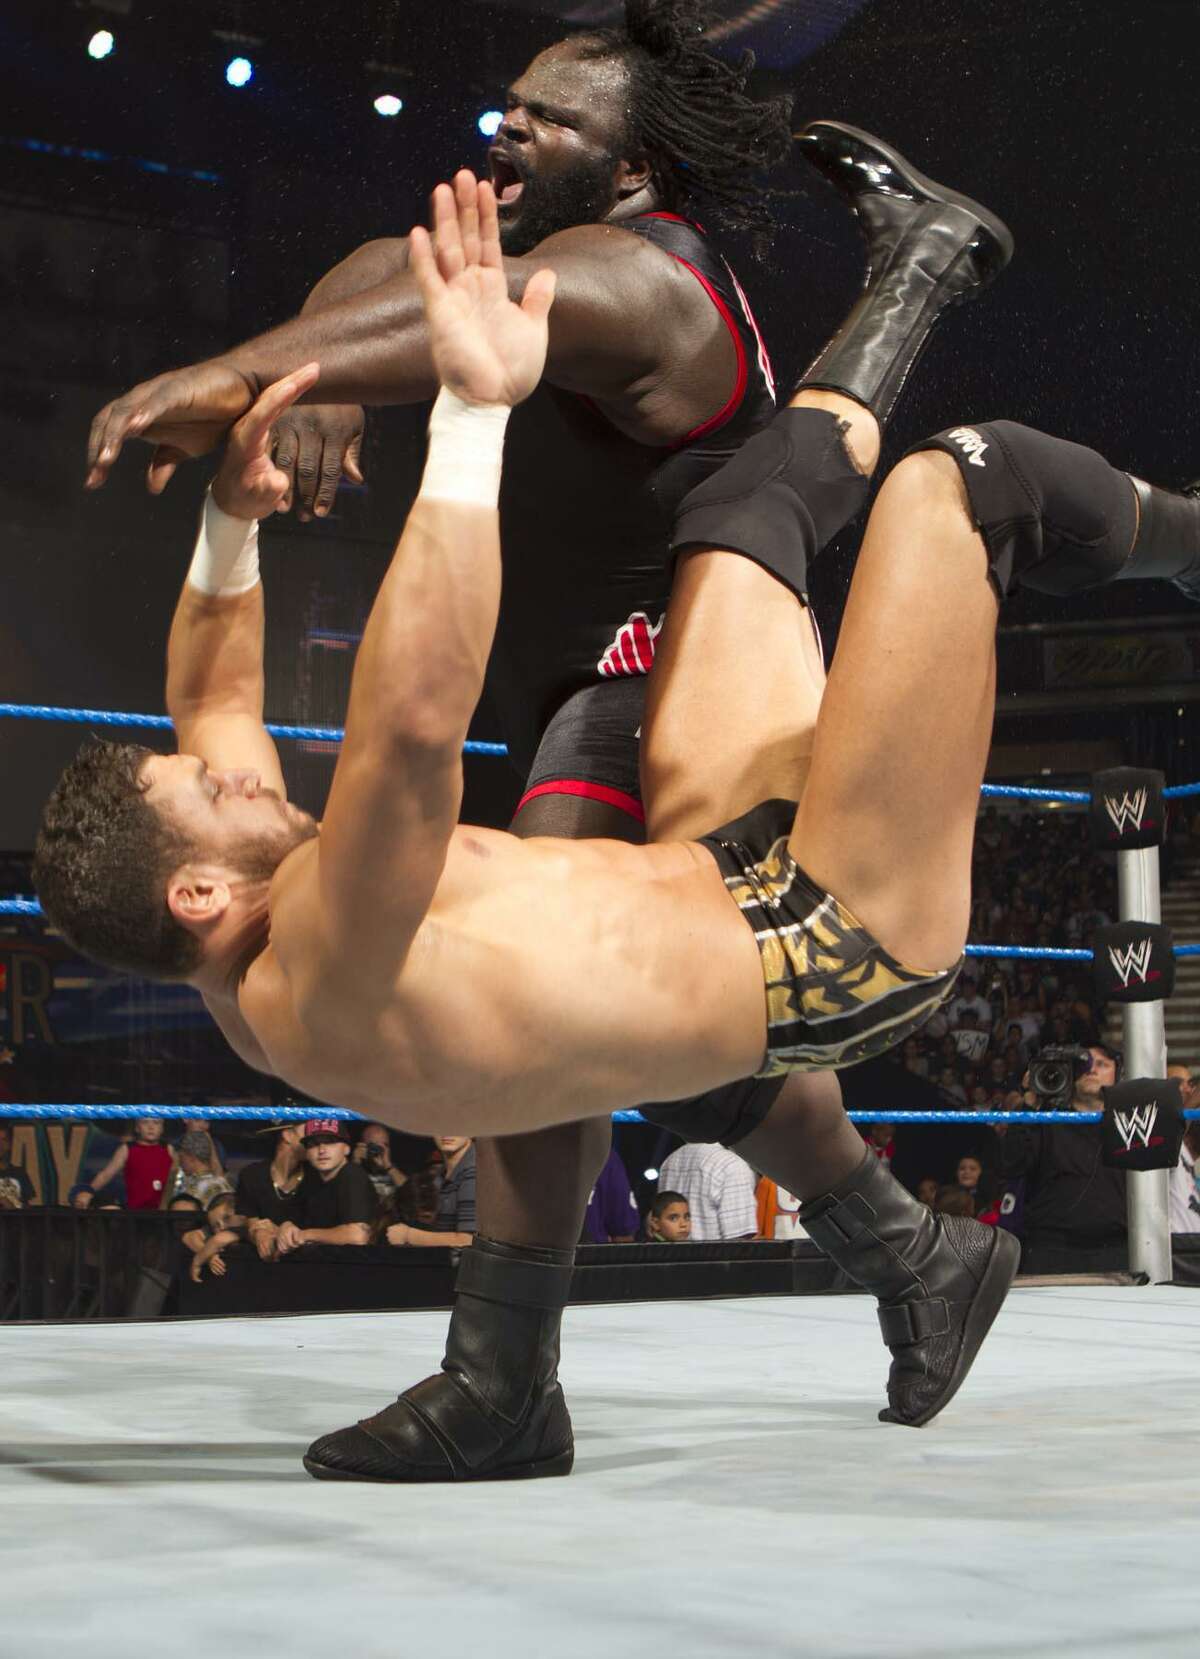 Mark Henry body slams his opponent in 2014 during a Road to WrestleMania event.